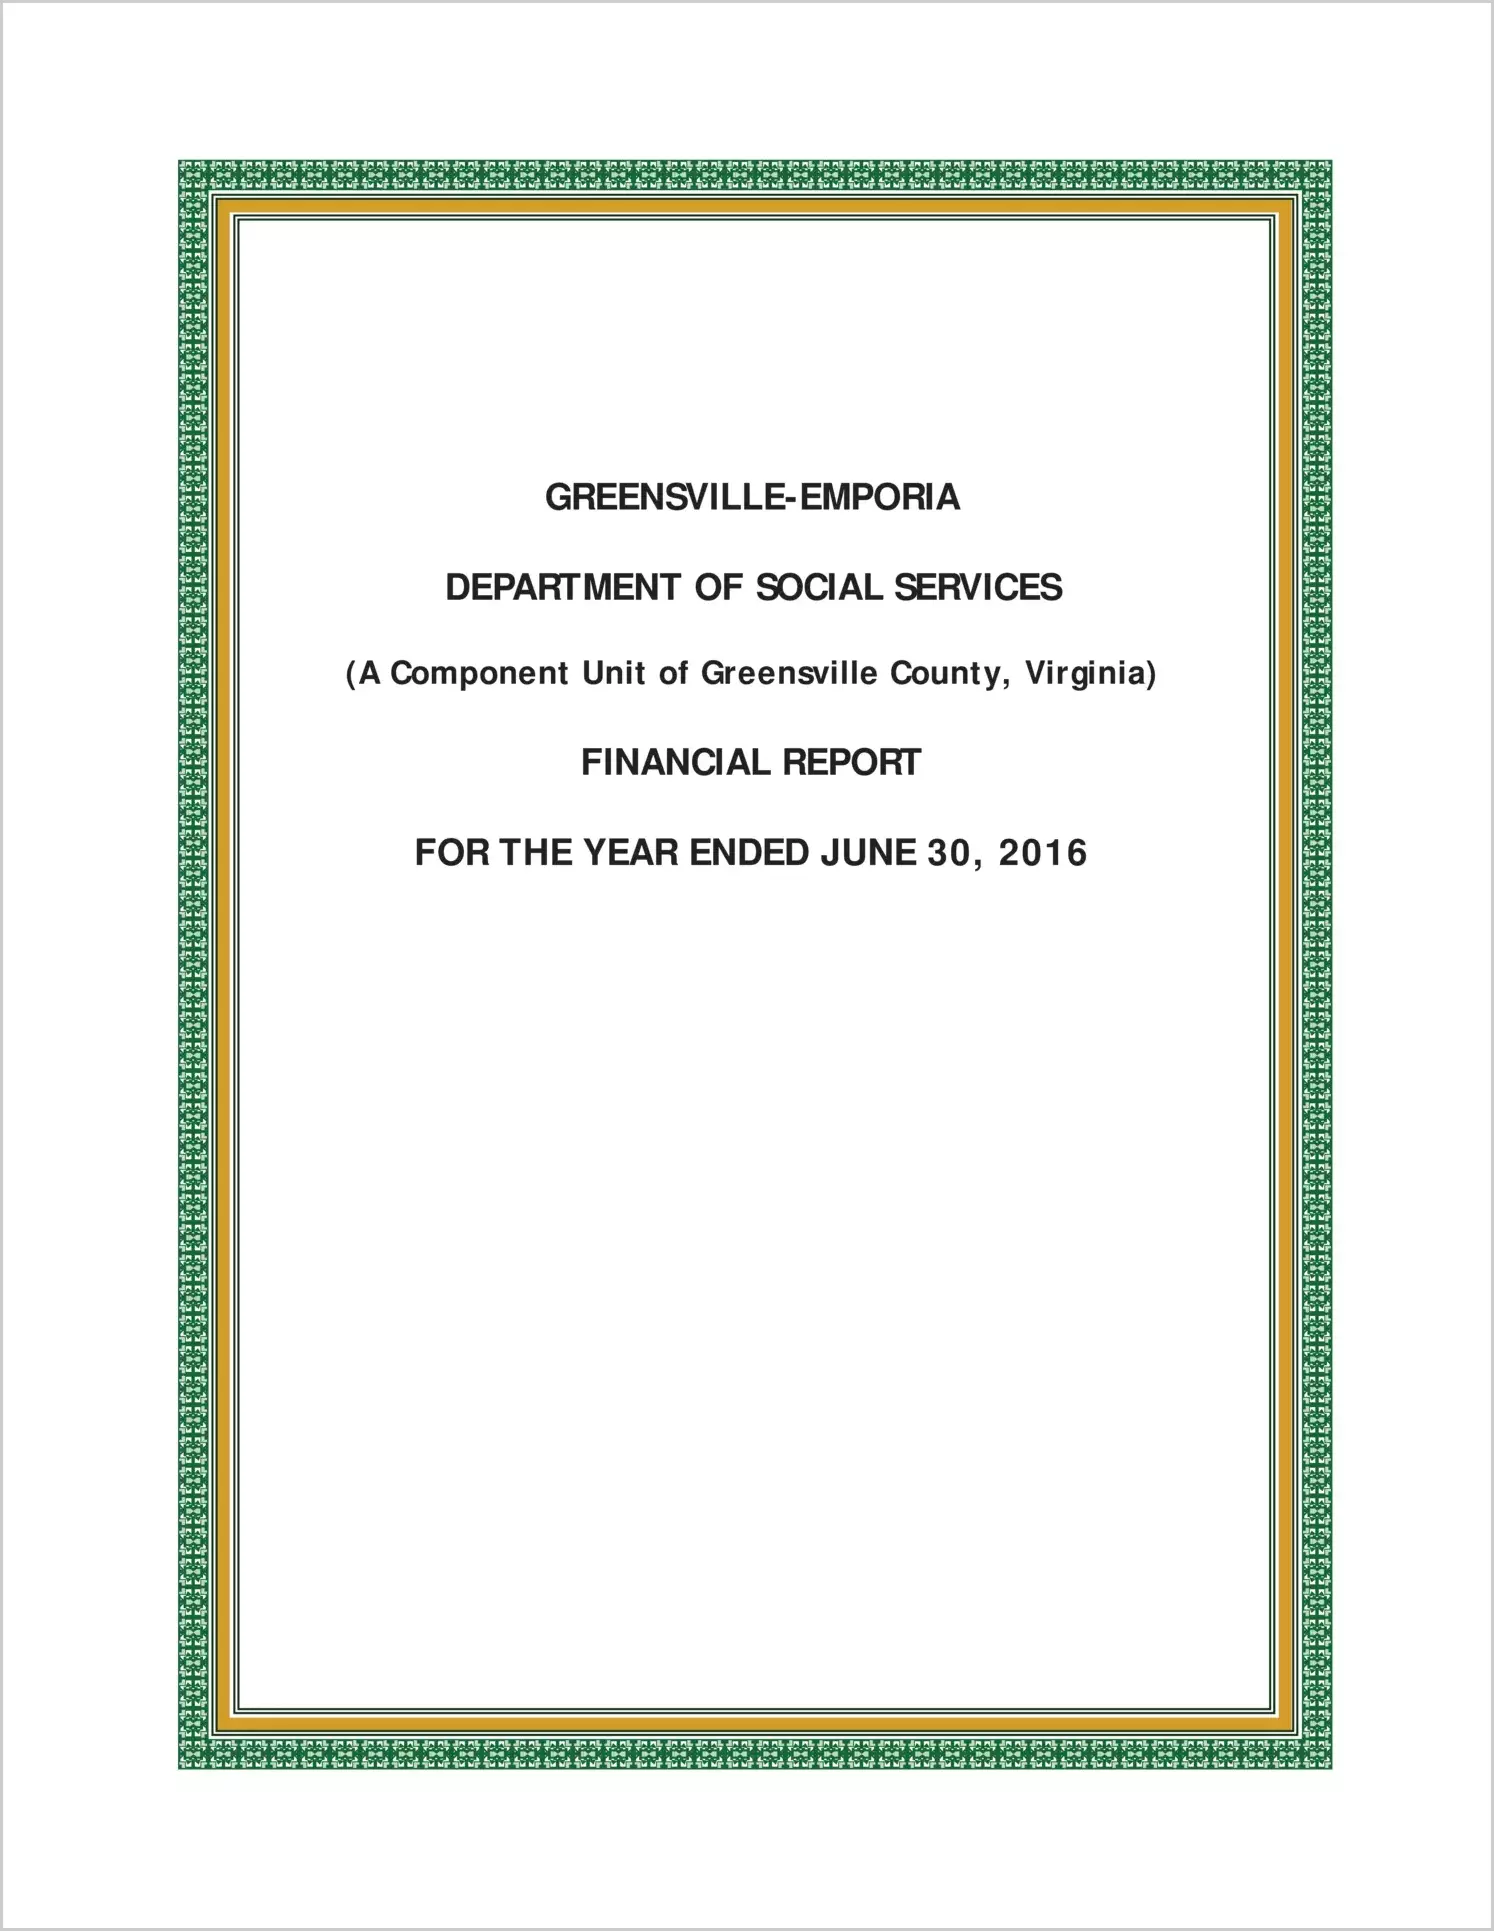 2016 ABC/Other Annual Financial Report  for Greensville-Emporia Department of Social Services